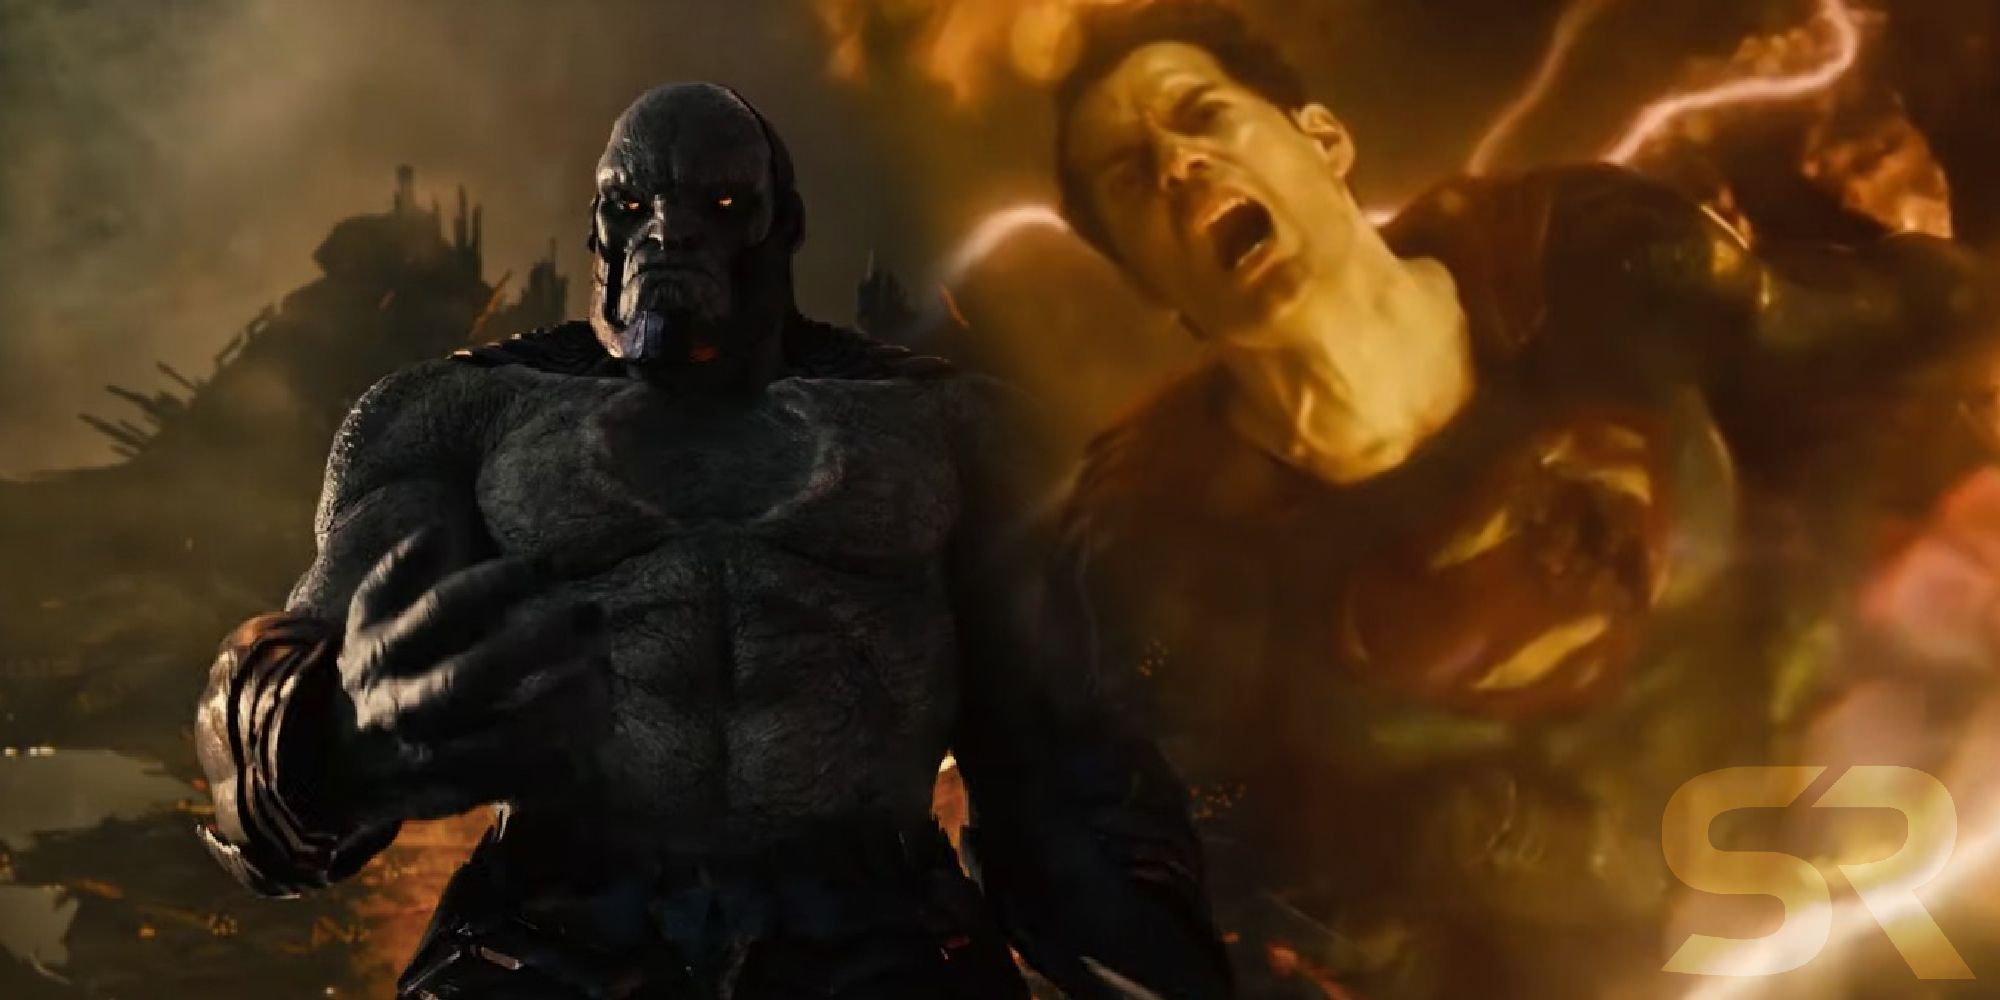 Henry Cavill as Superman and Darkseid in Zack Snyder's Justice League